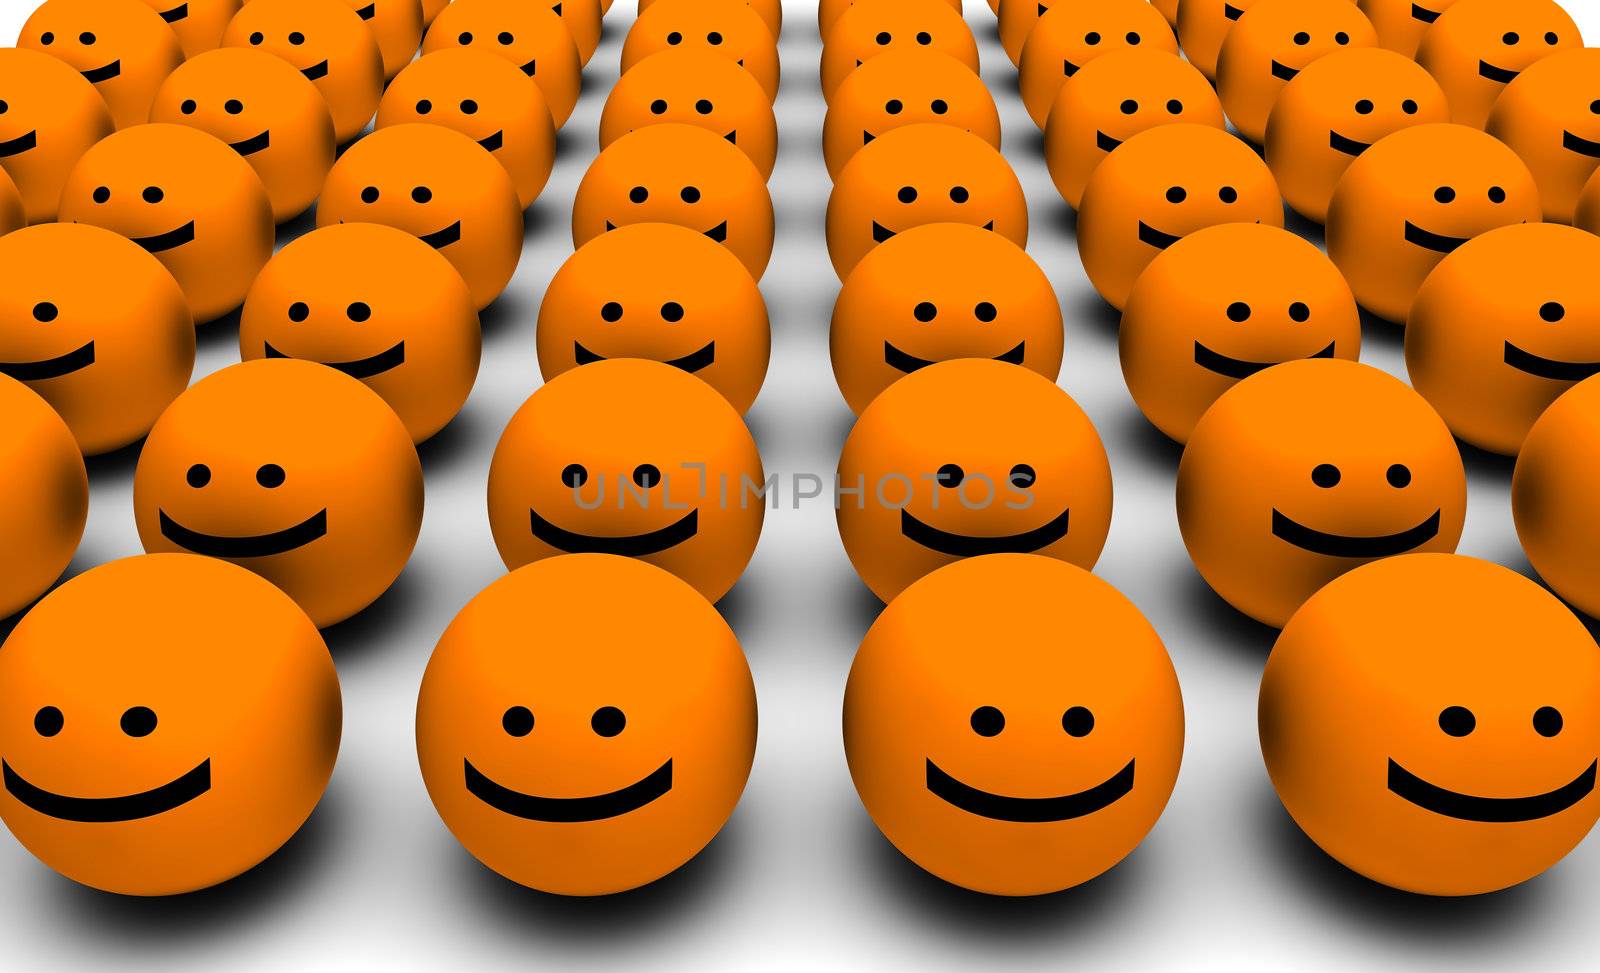 3D Round Smiley Faces as Background Abstract